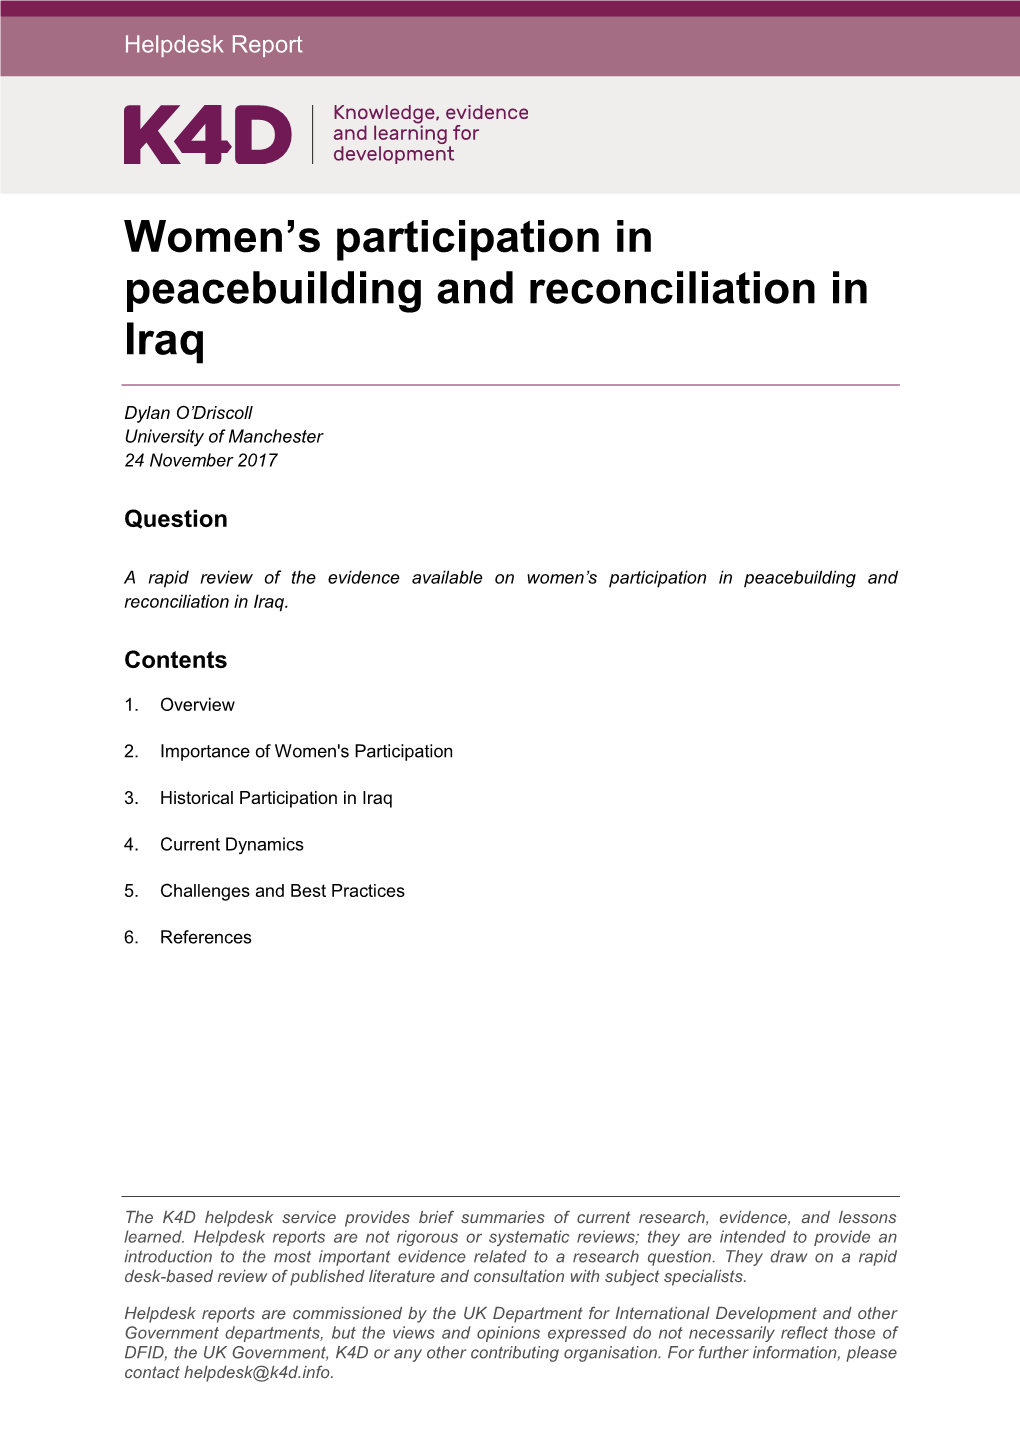 Women's Participation in Peacebuilding and Reconciliation in Iraq